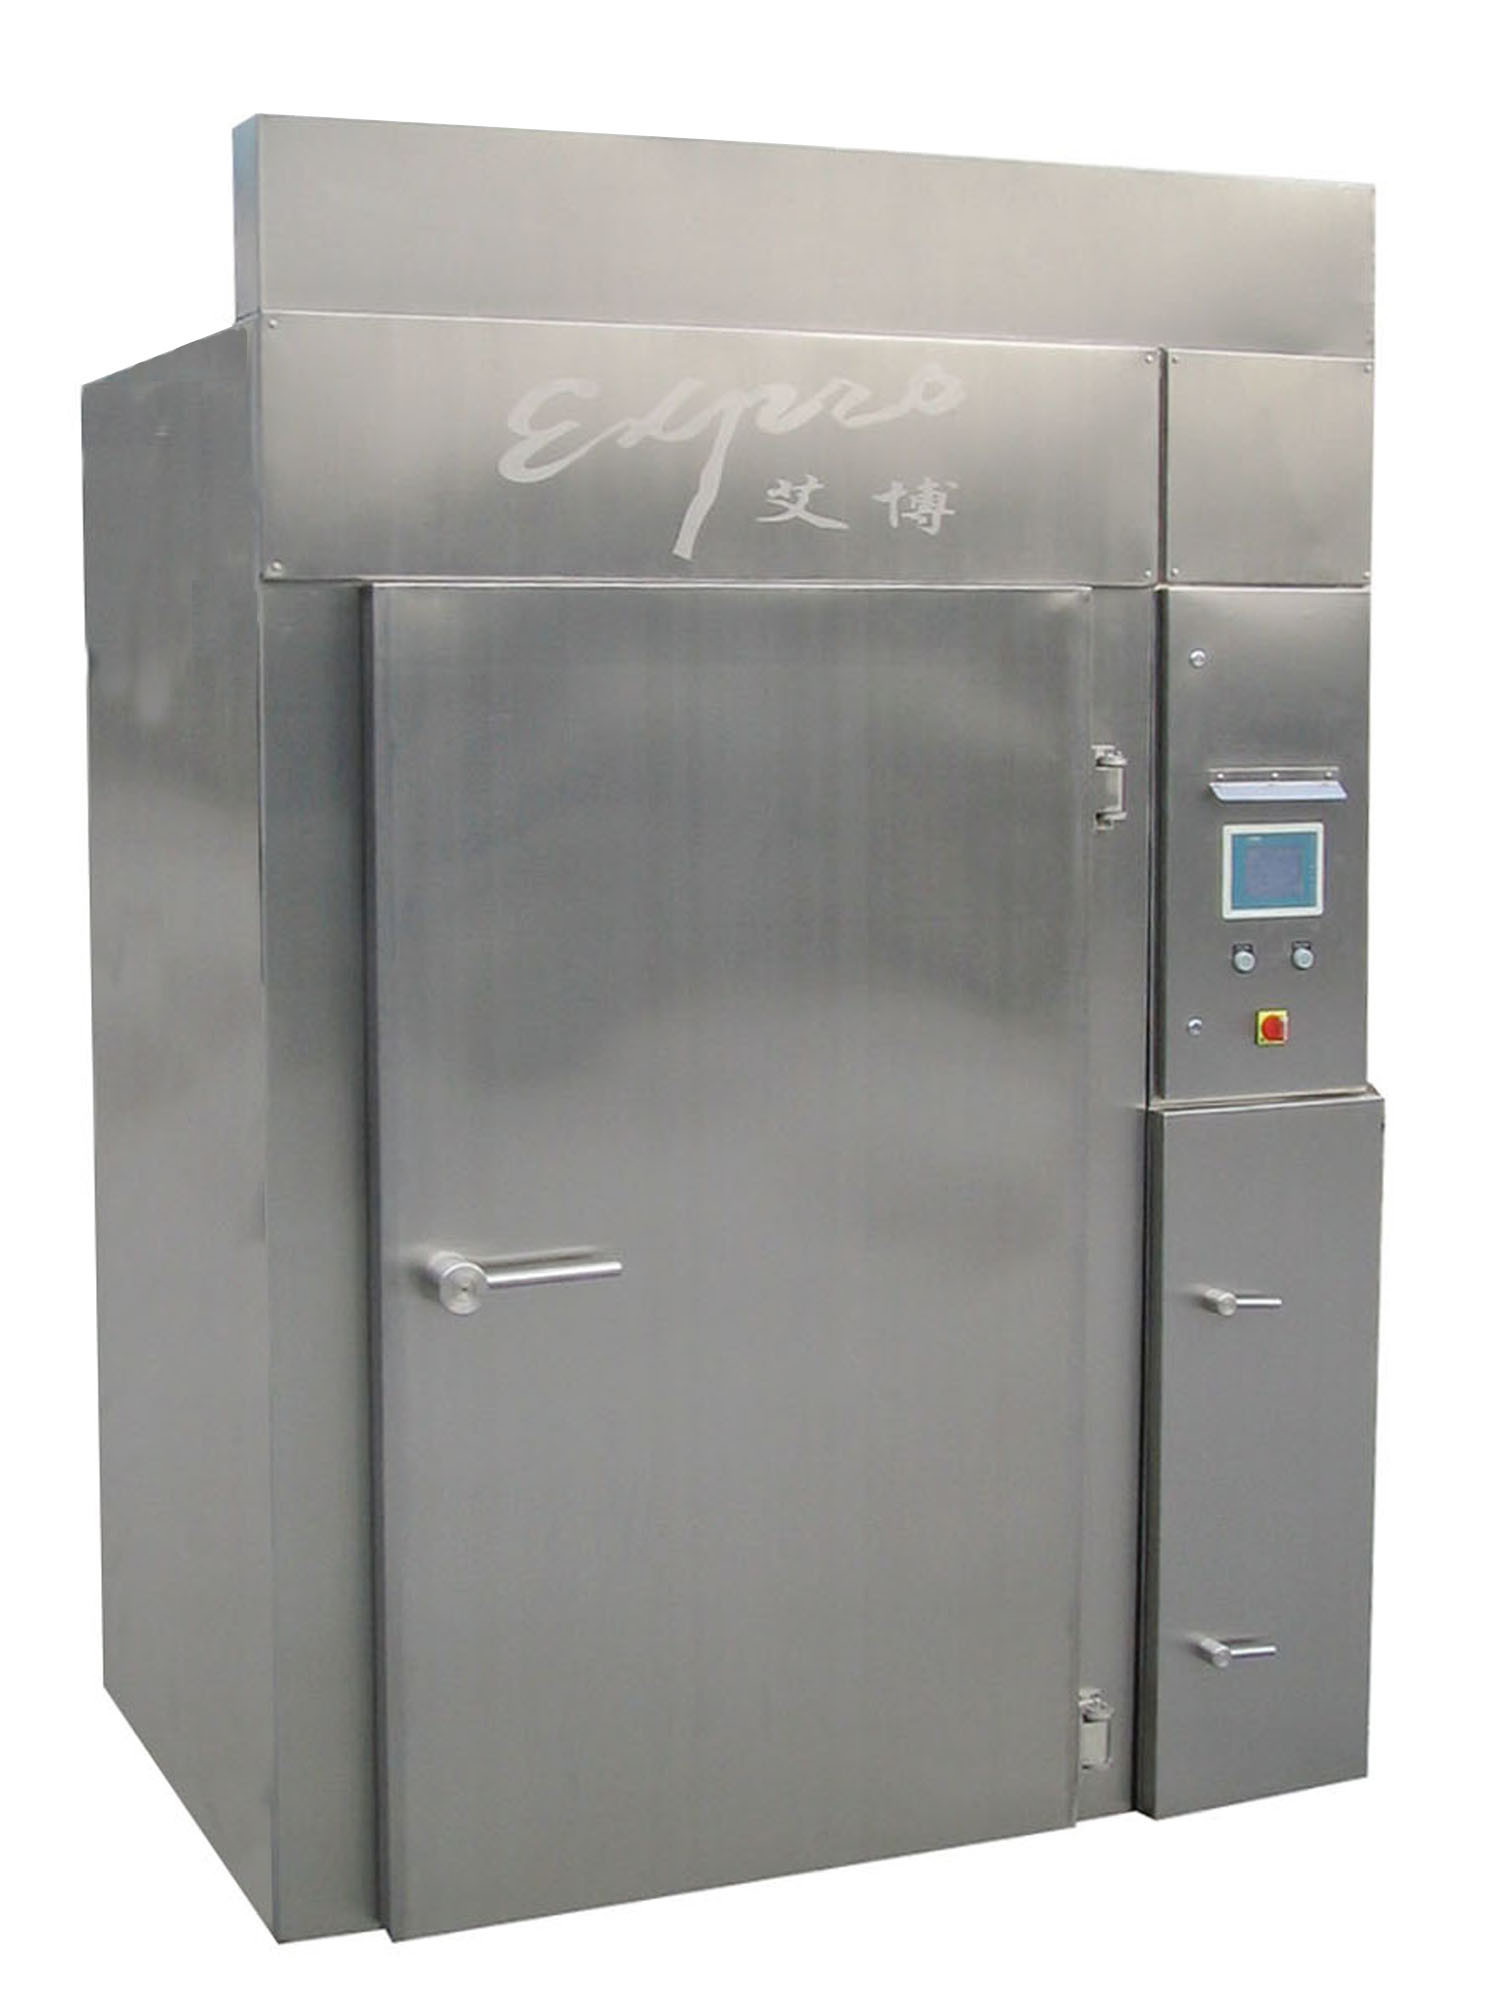 Expro Smoking House (BYXX-I) / Steam Heating / Meat Processing Machine / PLC Control /1door 1trolley